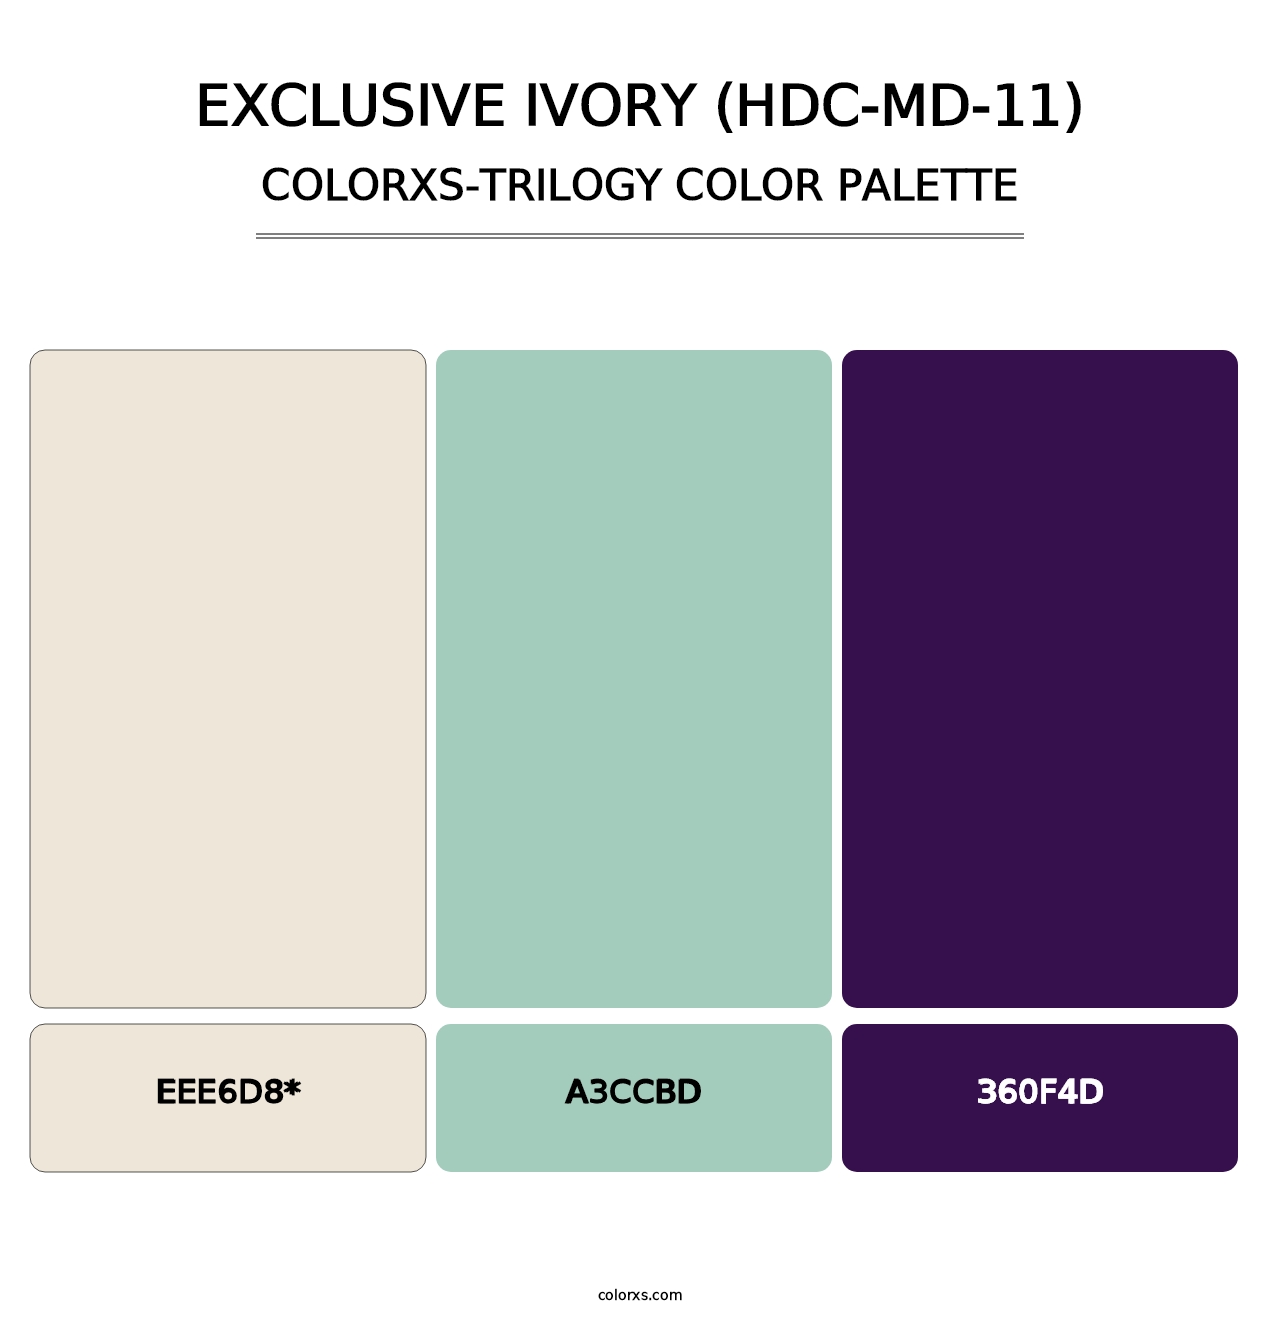 Exclusive Ivory (HDC-MD-11) - Colorxs Trilogy Palette